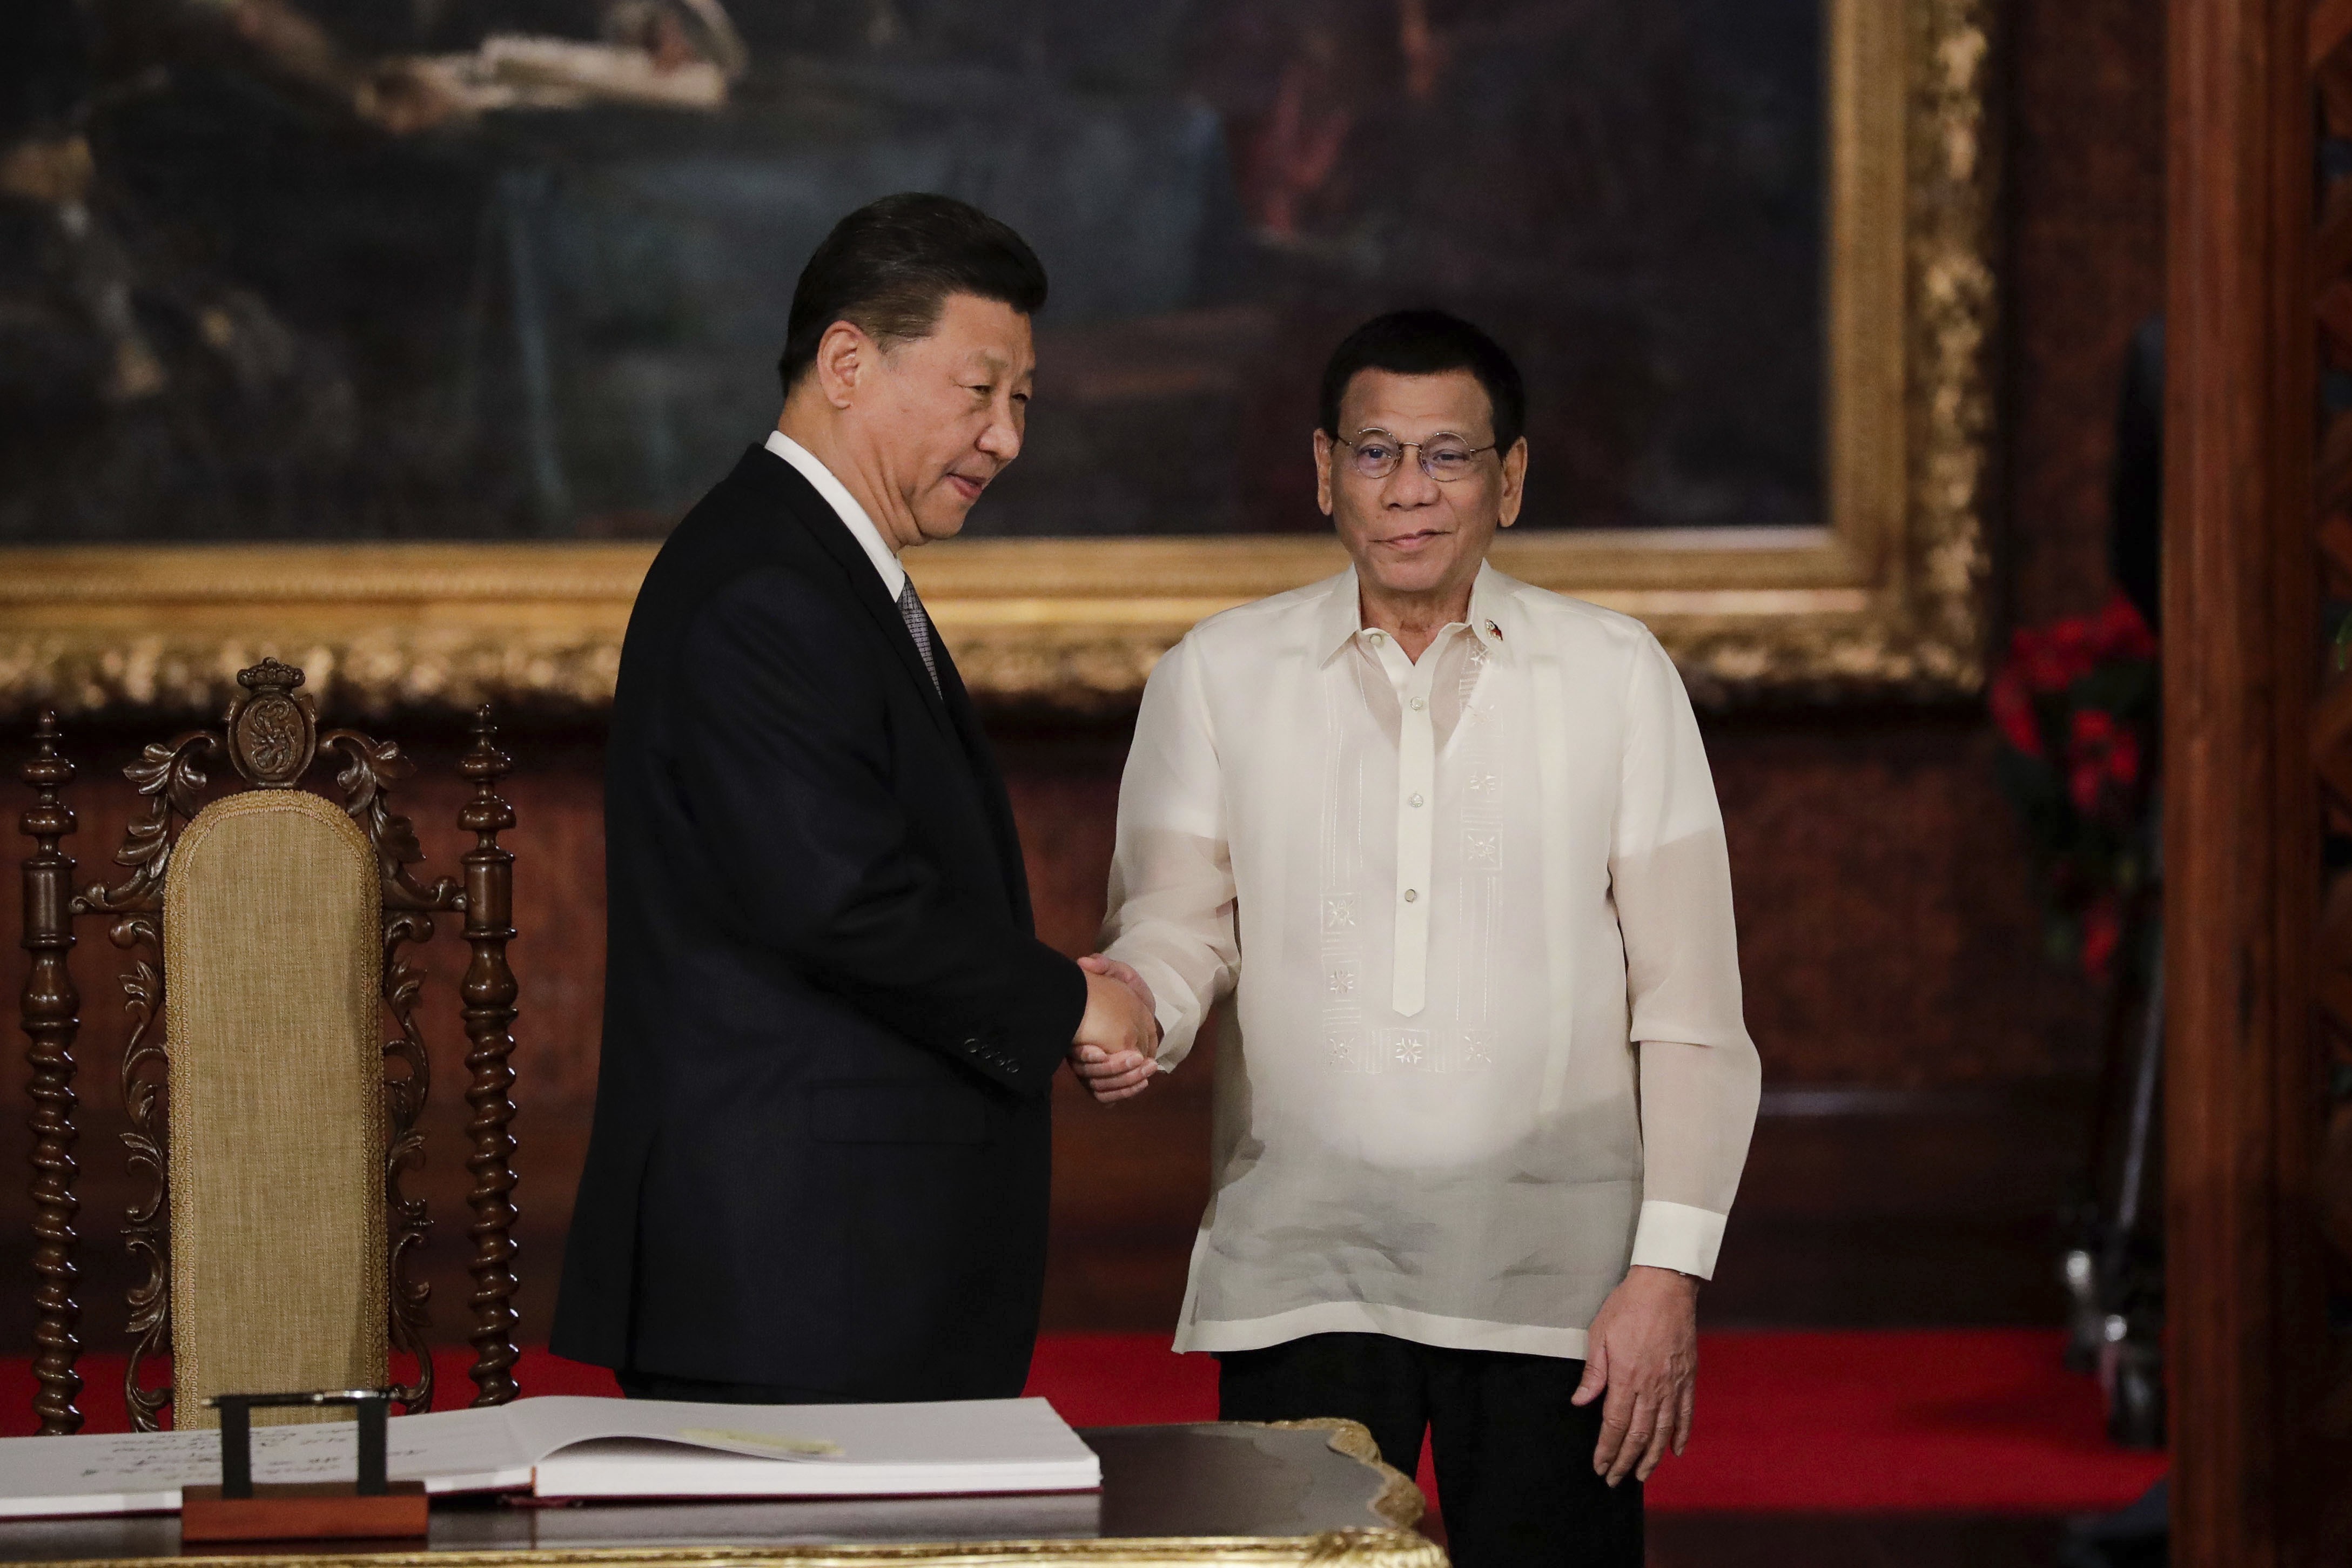 Chinese President Xi Jinping (left) shakes hands with Philippine President Rodrigo Duterte at Malacanang Palace in Manila, Philippines, on November 20, 2018. Xi’s two-day state visit was the first by a Chinese leader in 13 years. Photo: AP